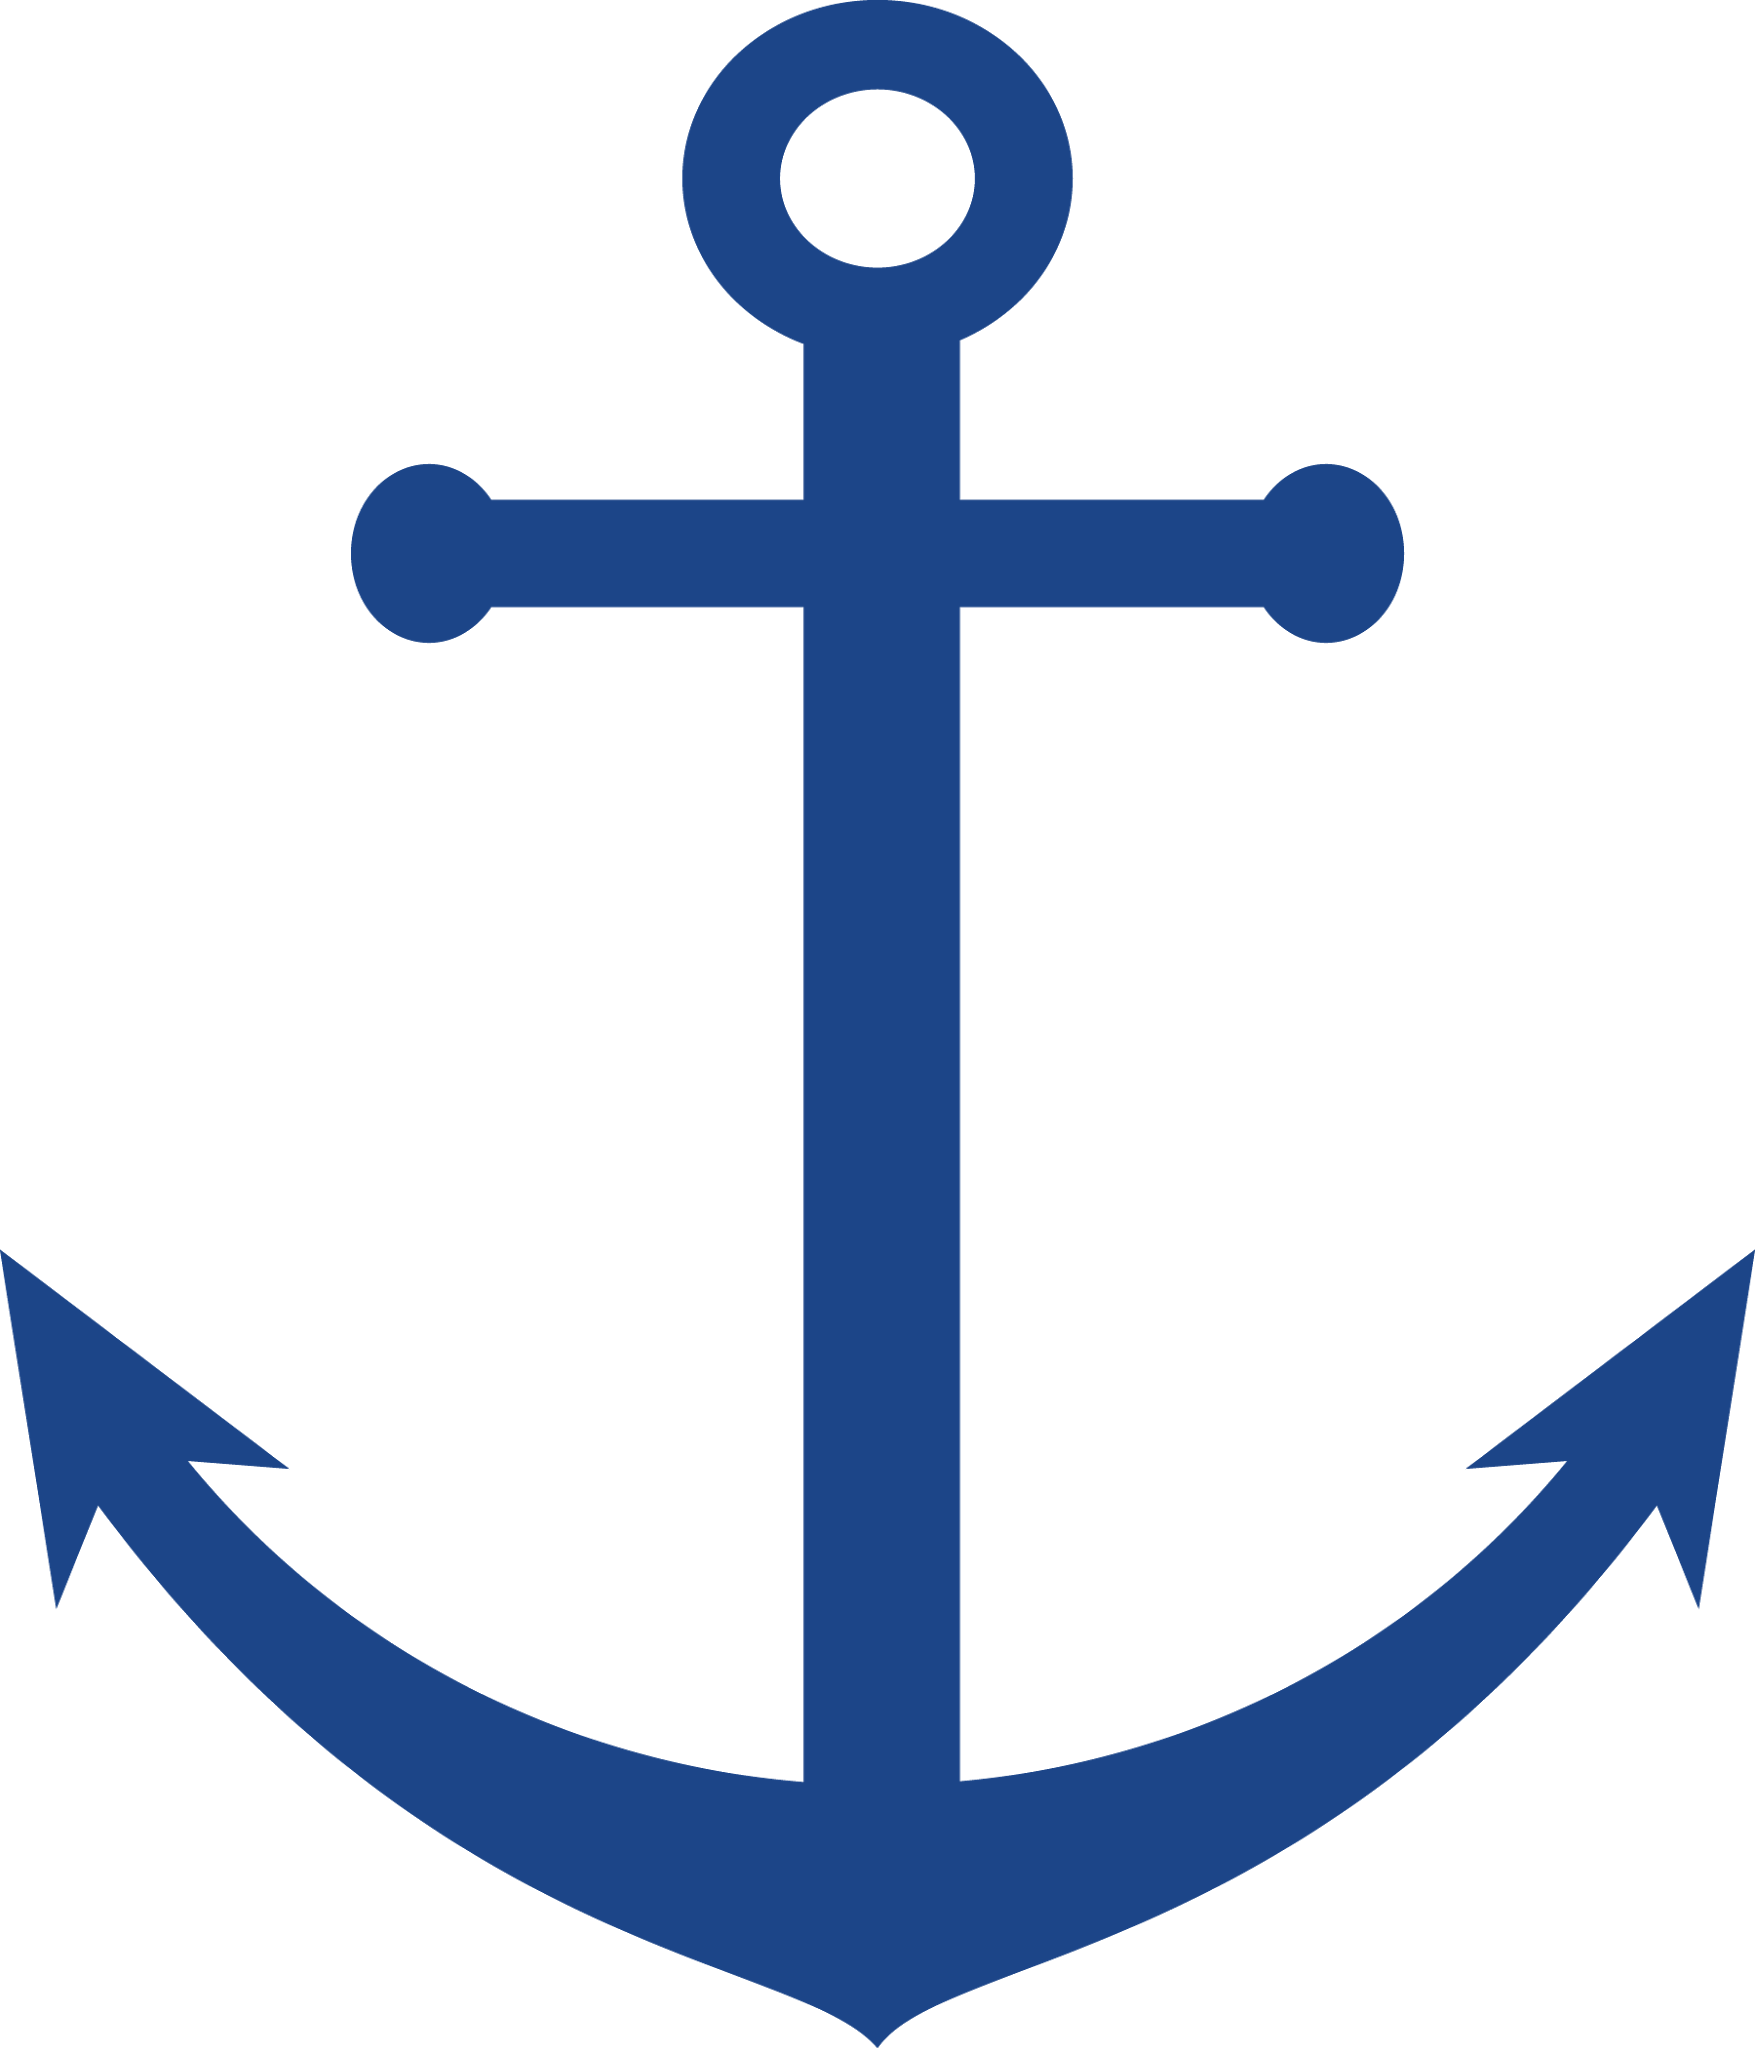 Download PNG image - Nautical Anchor Transparent Images PNG 